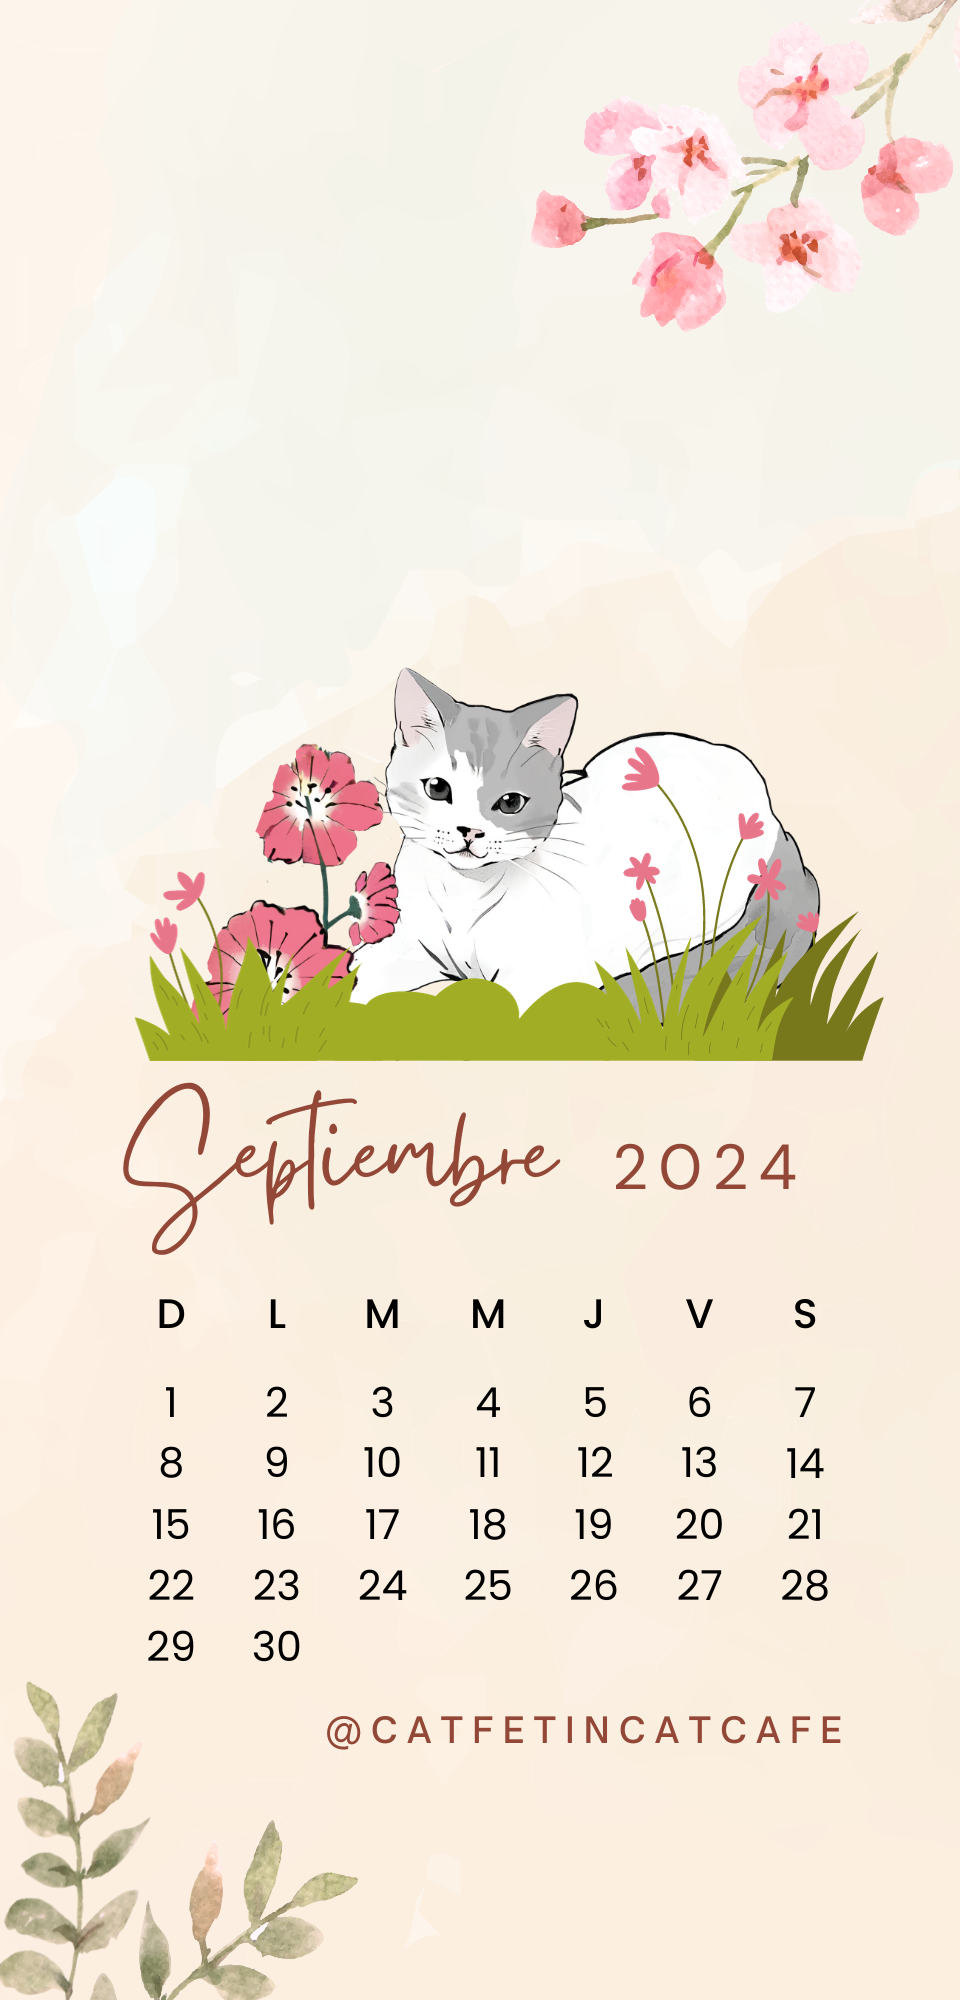 Septiembre 2024 (2).png